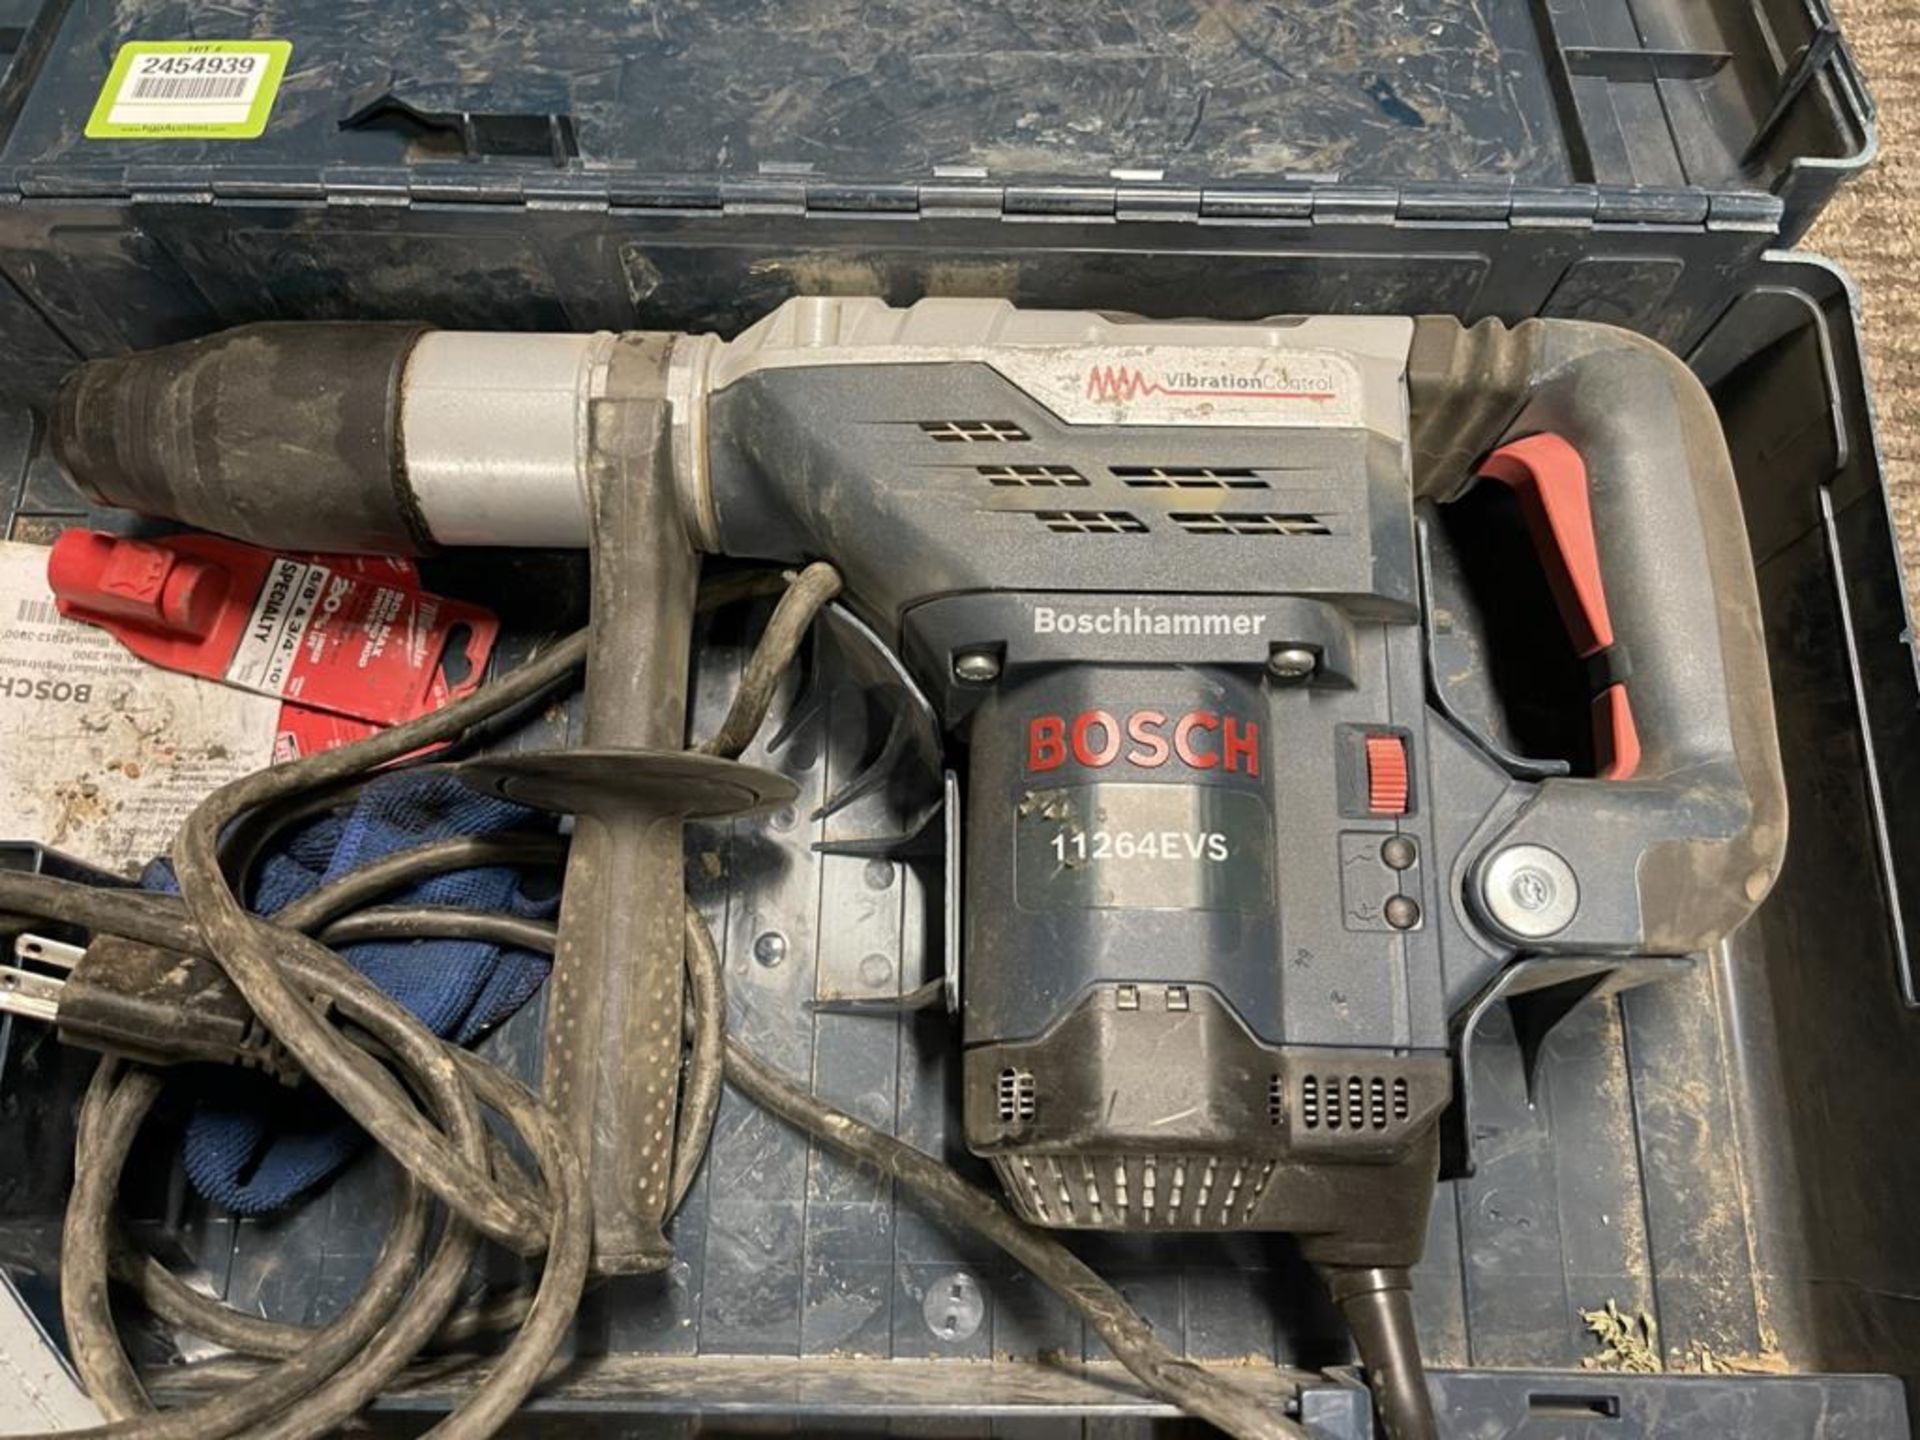 Bosch Variable Speed Rotary Hammer - Image 2 of 3